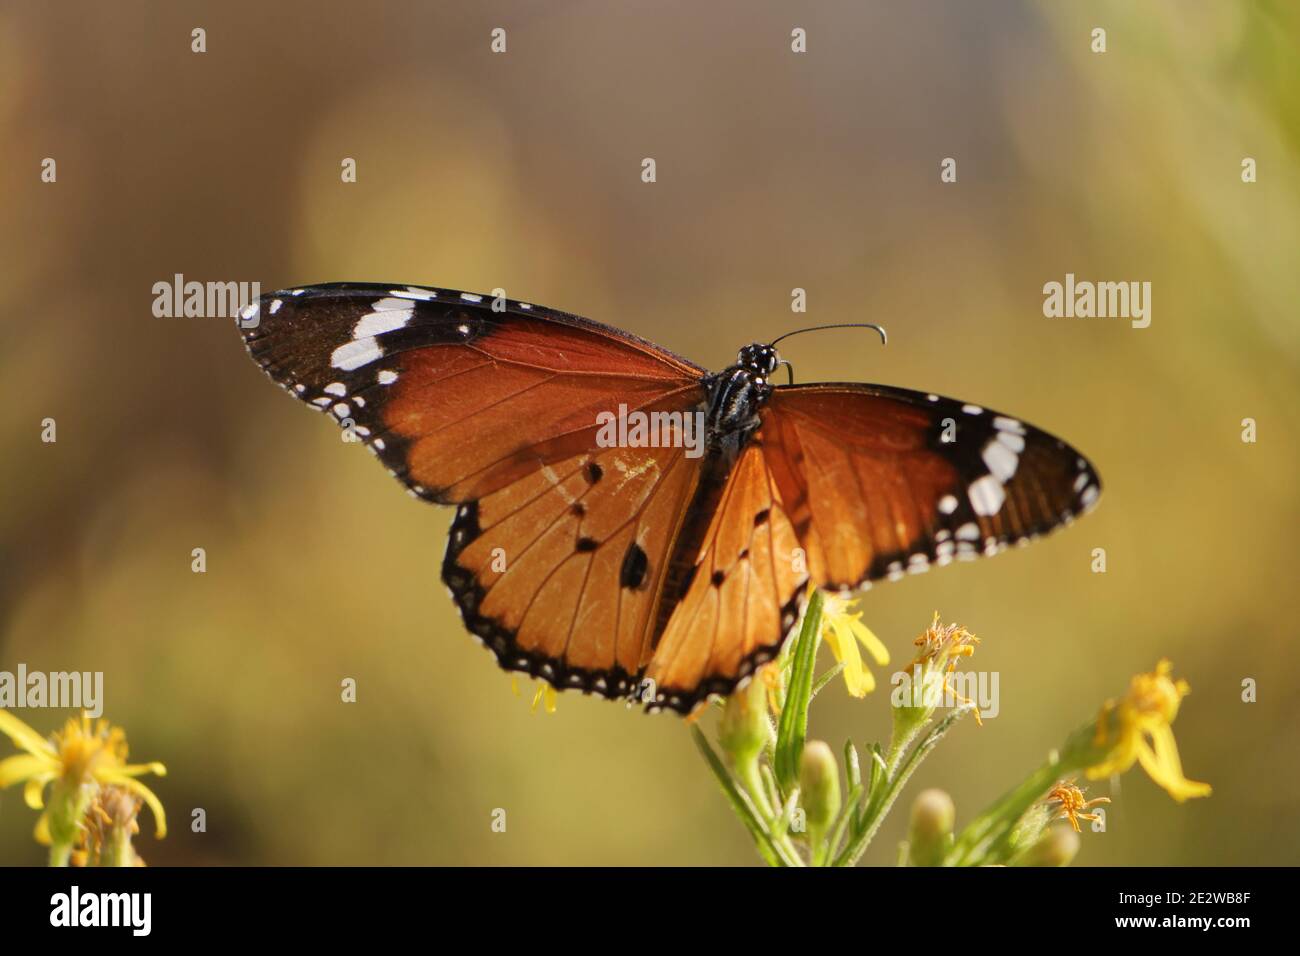 Closeup of a vanessa cardui butterfly (painted lady) feeding from flowers in front of a blurry background Stock Photo